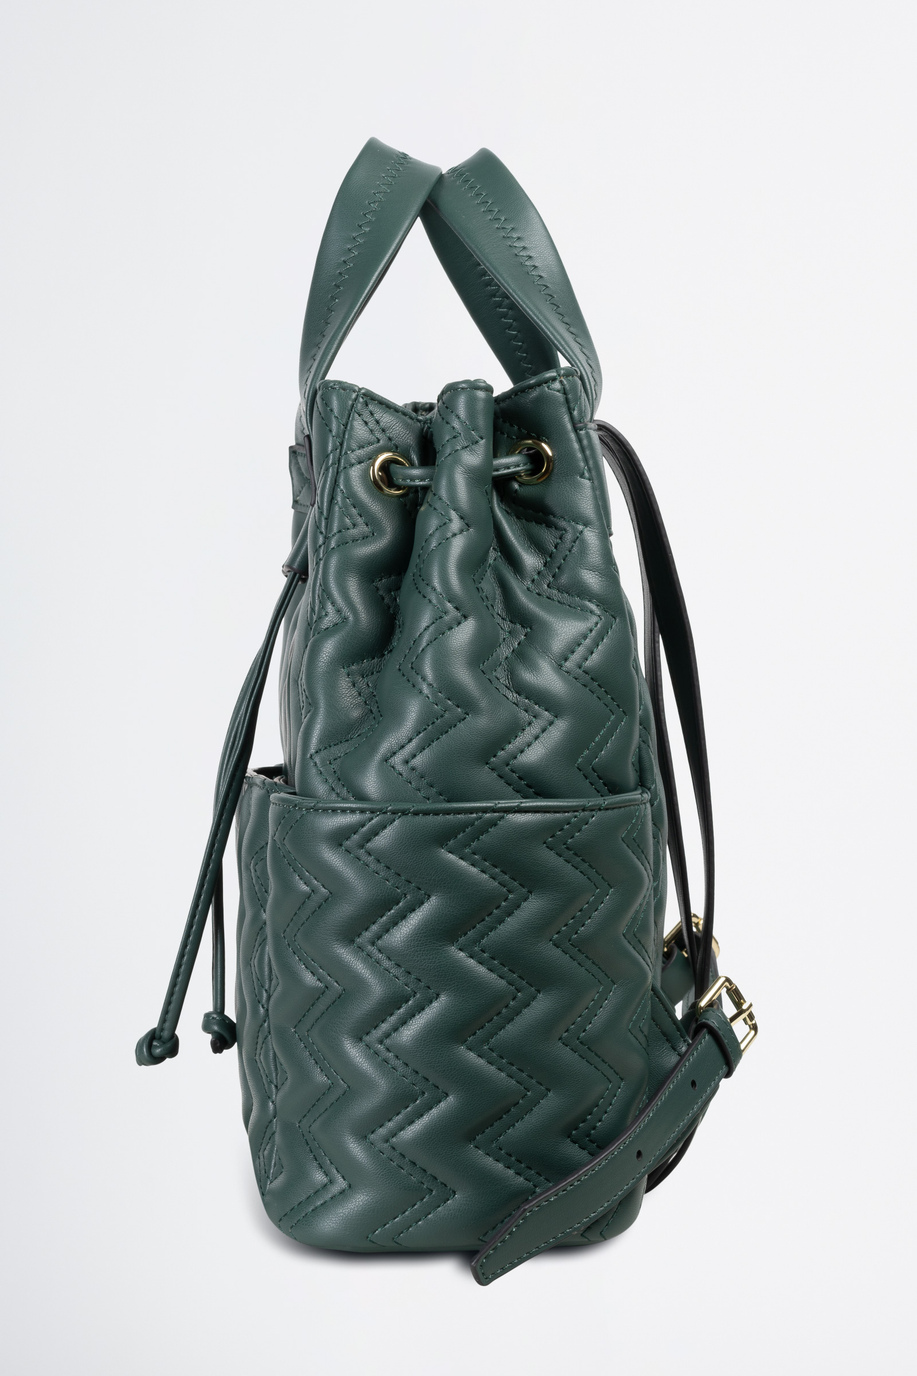 Backpack in matelassé fabric - Woman leather goods | La Martina - Official Online Shop